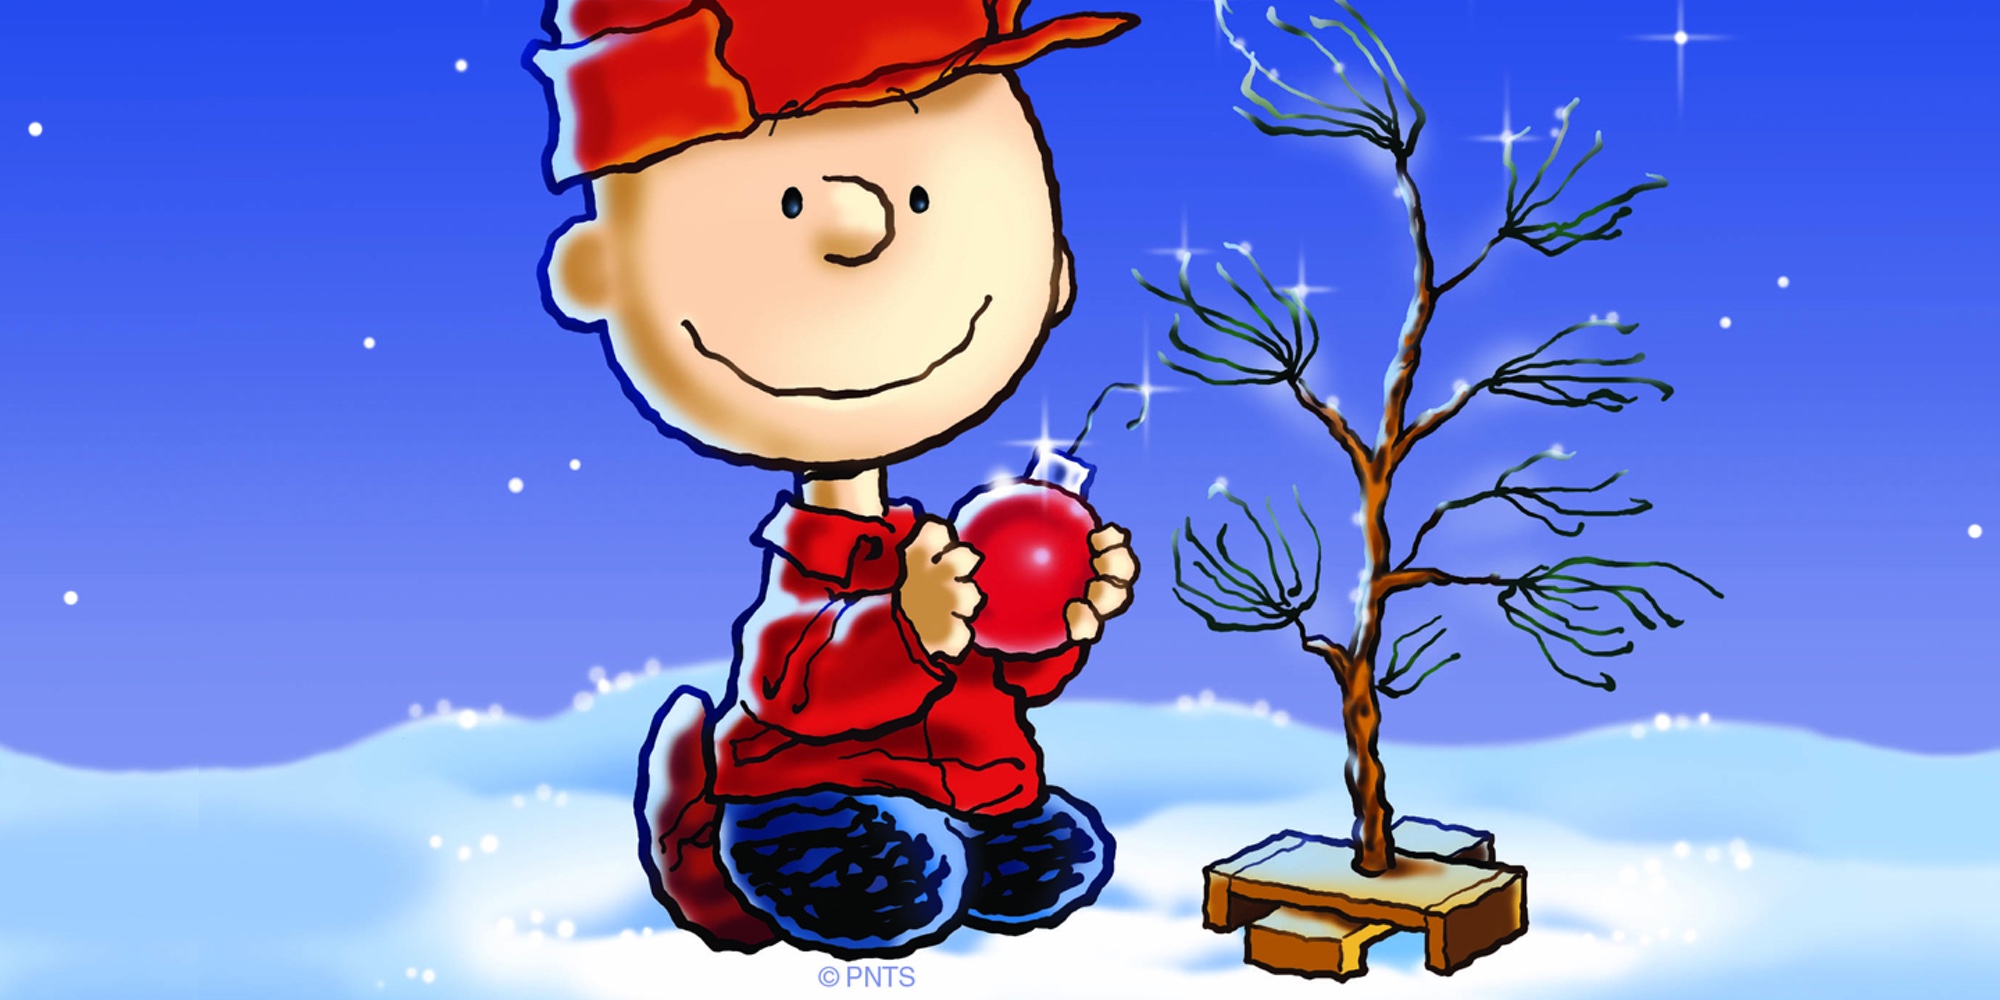 Own the classic: A Charlie Brown Christmas Hardcover Book for $5 (Reg ...